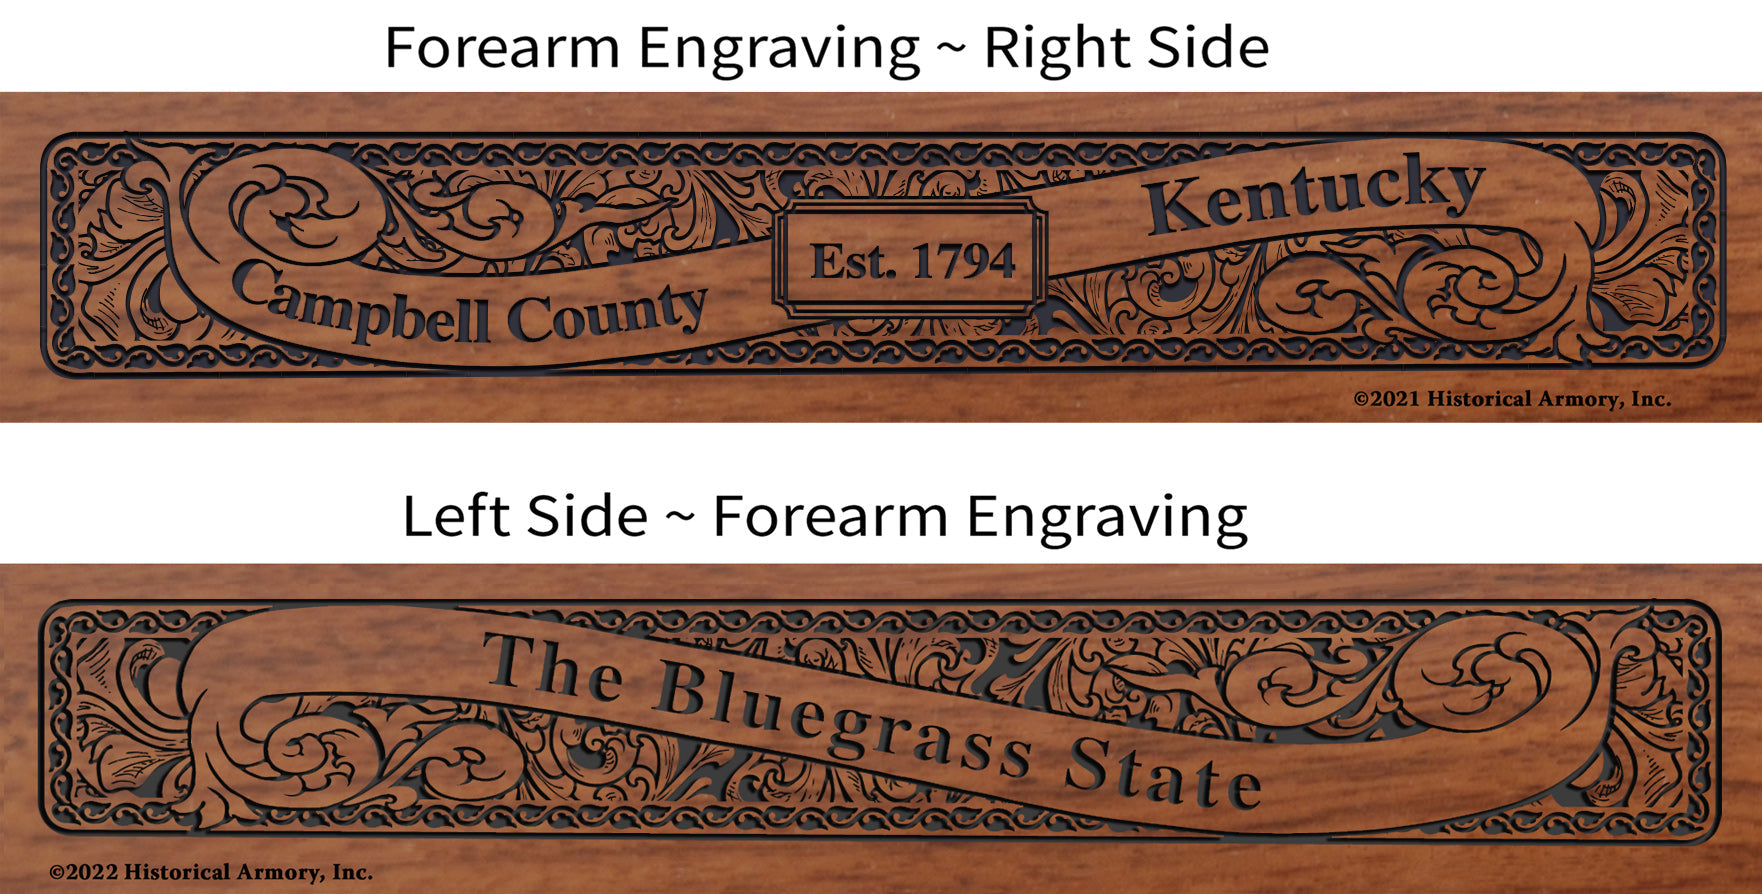 Campbell County Kentucky Engraved Rifle Forearm